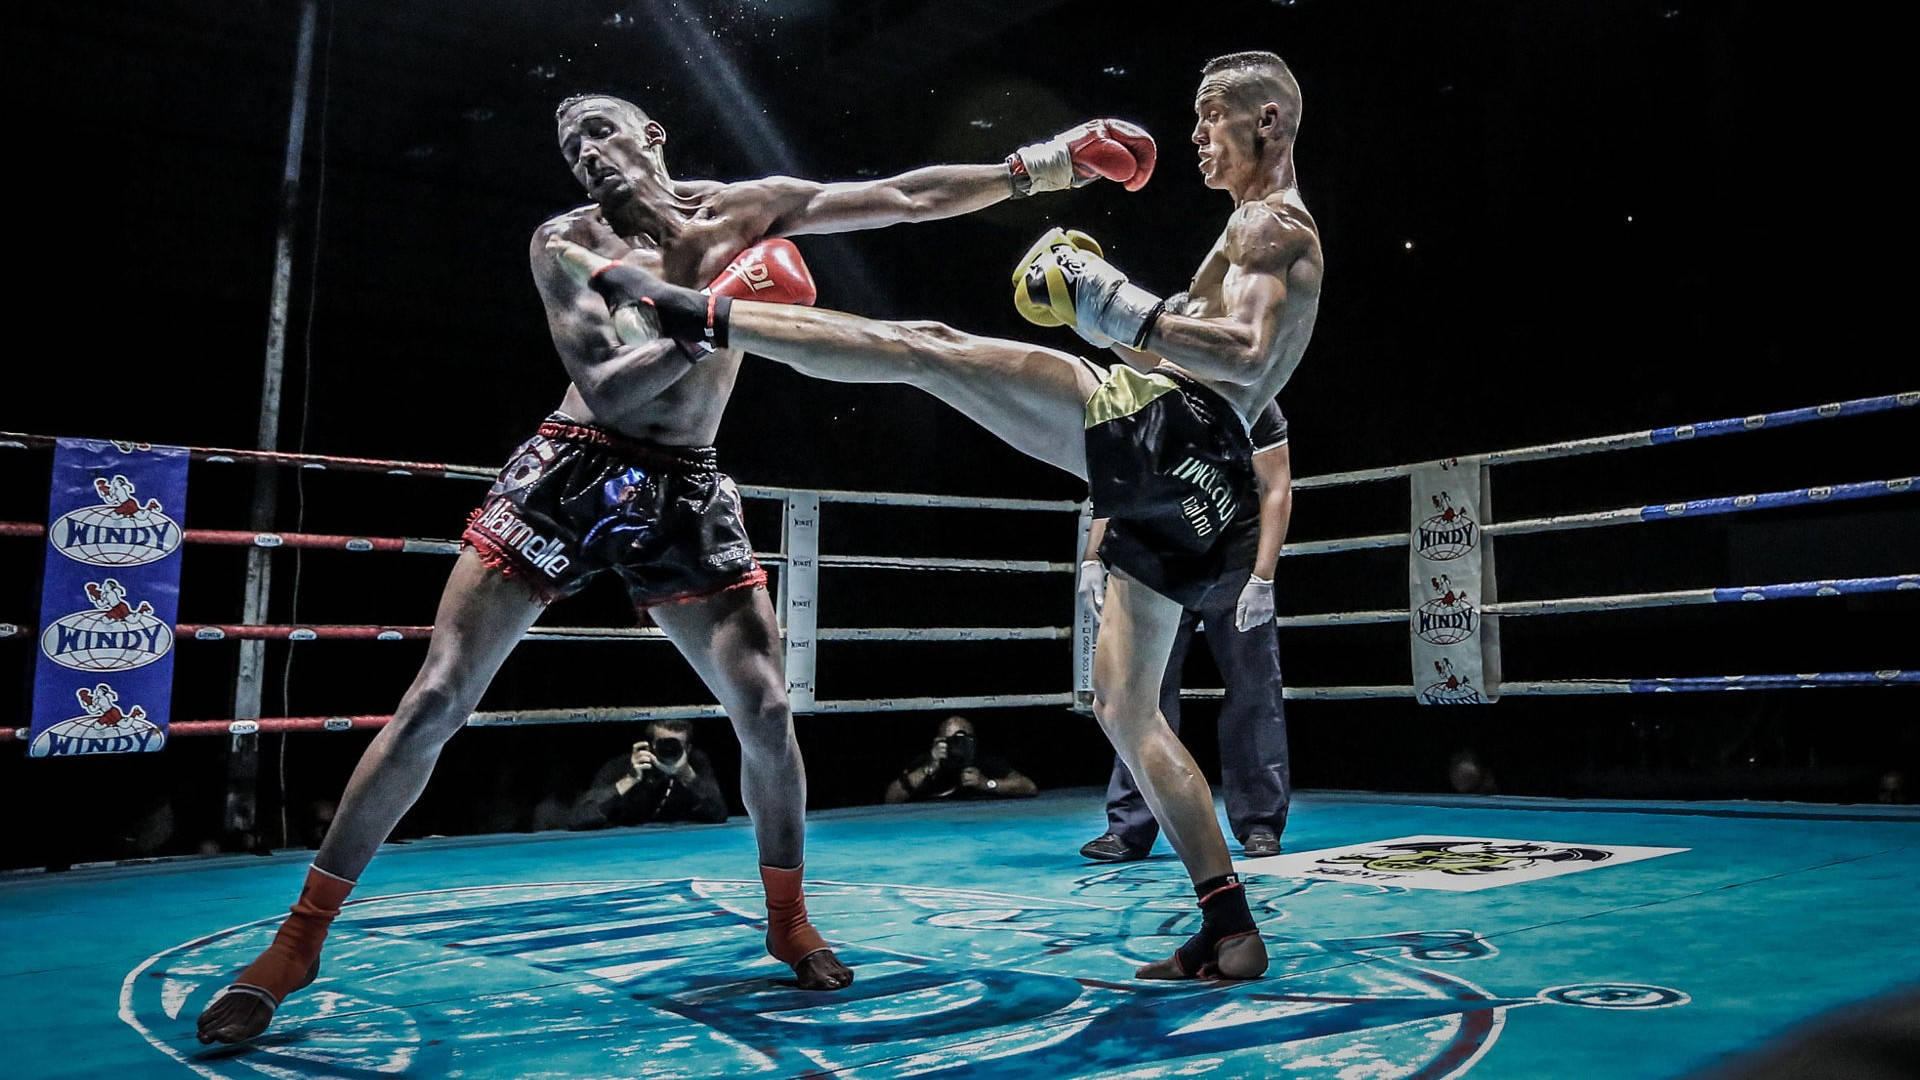 Exciting Moments Captured During an Intense Kickboxing Match Wallpaper